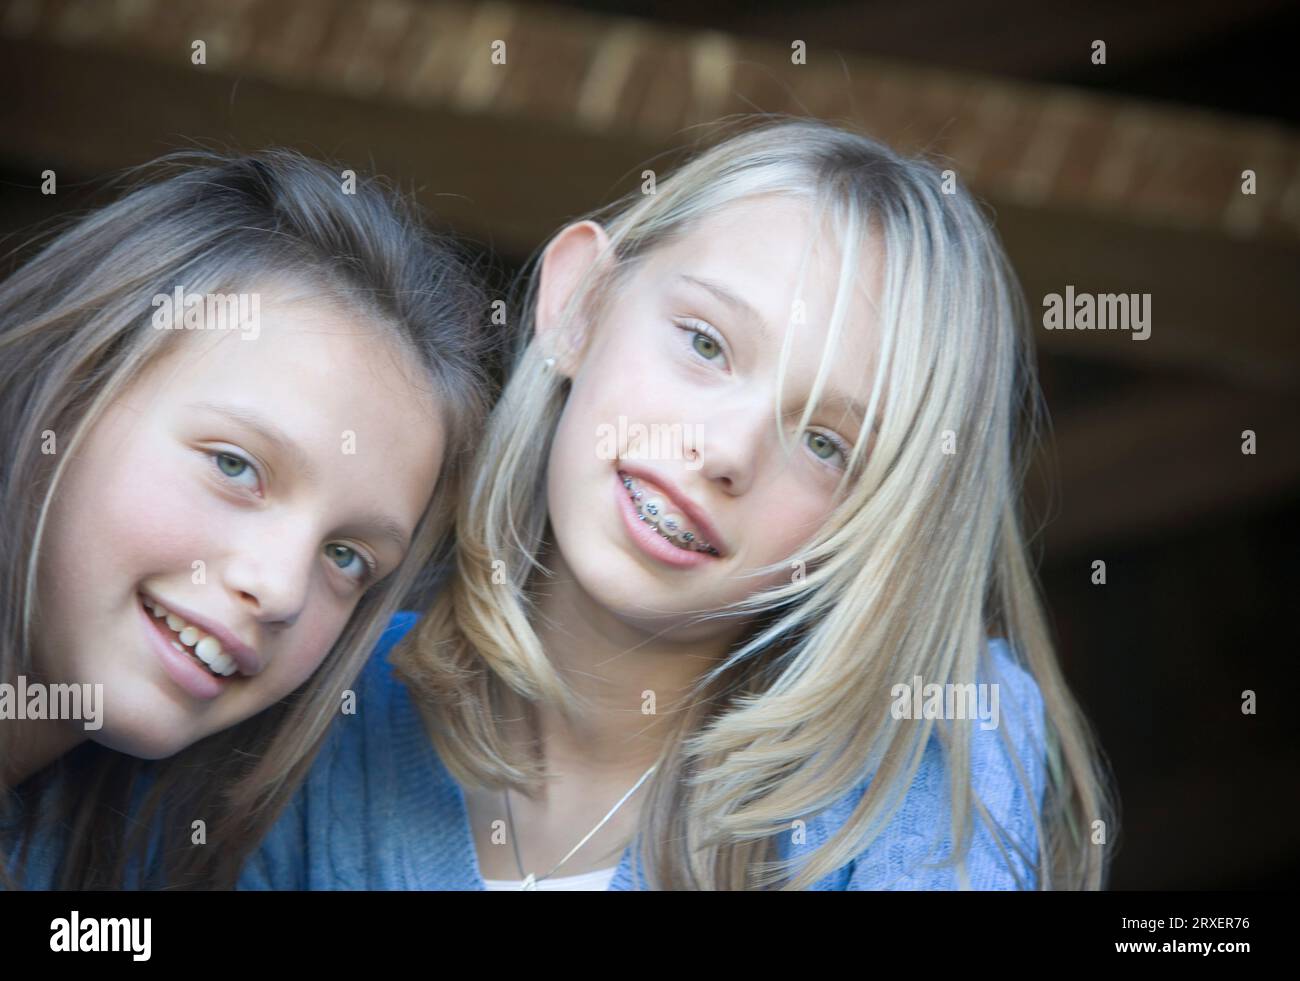 Two young girls smiling at the camera. Stock Photo